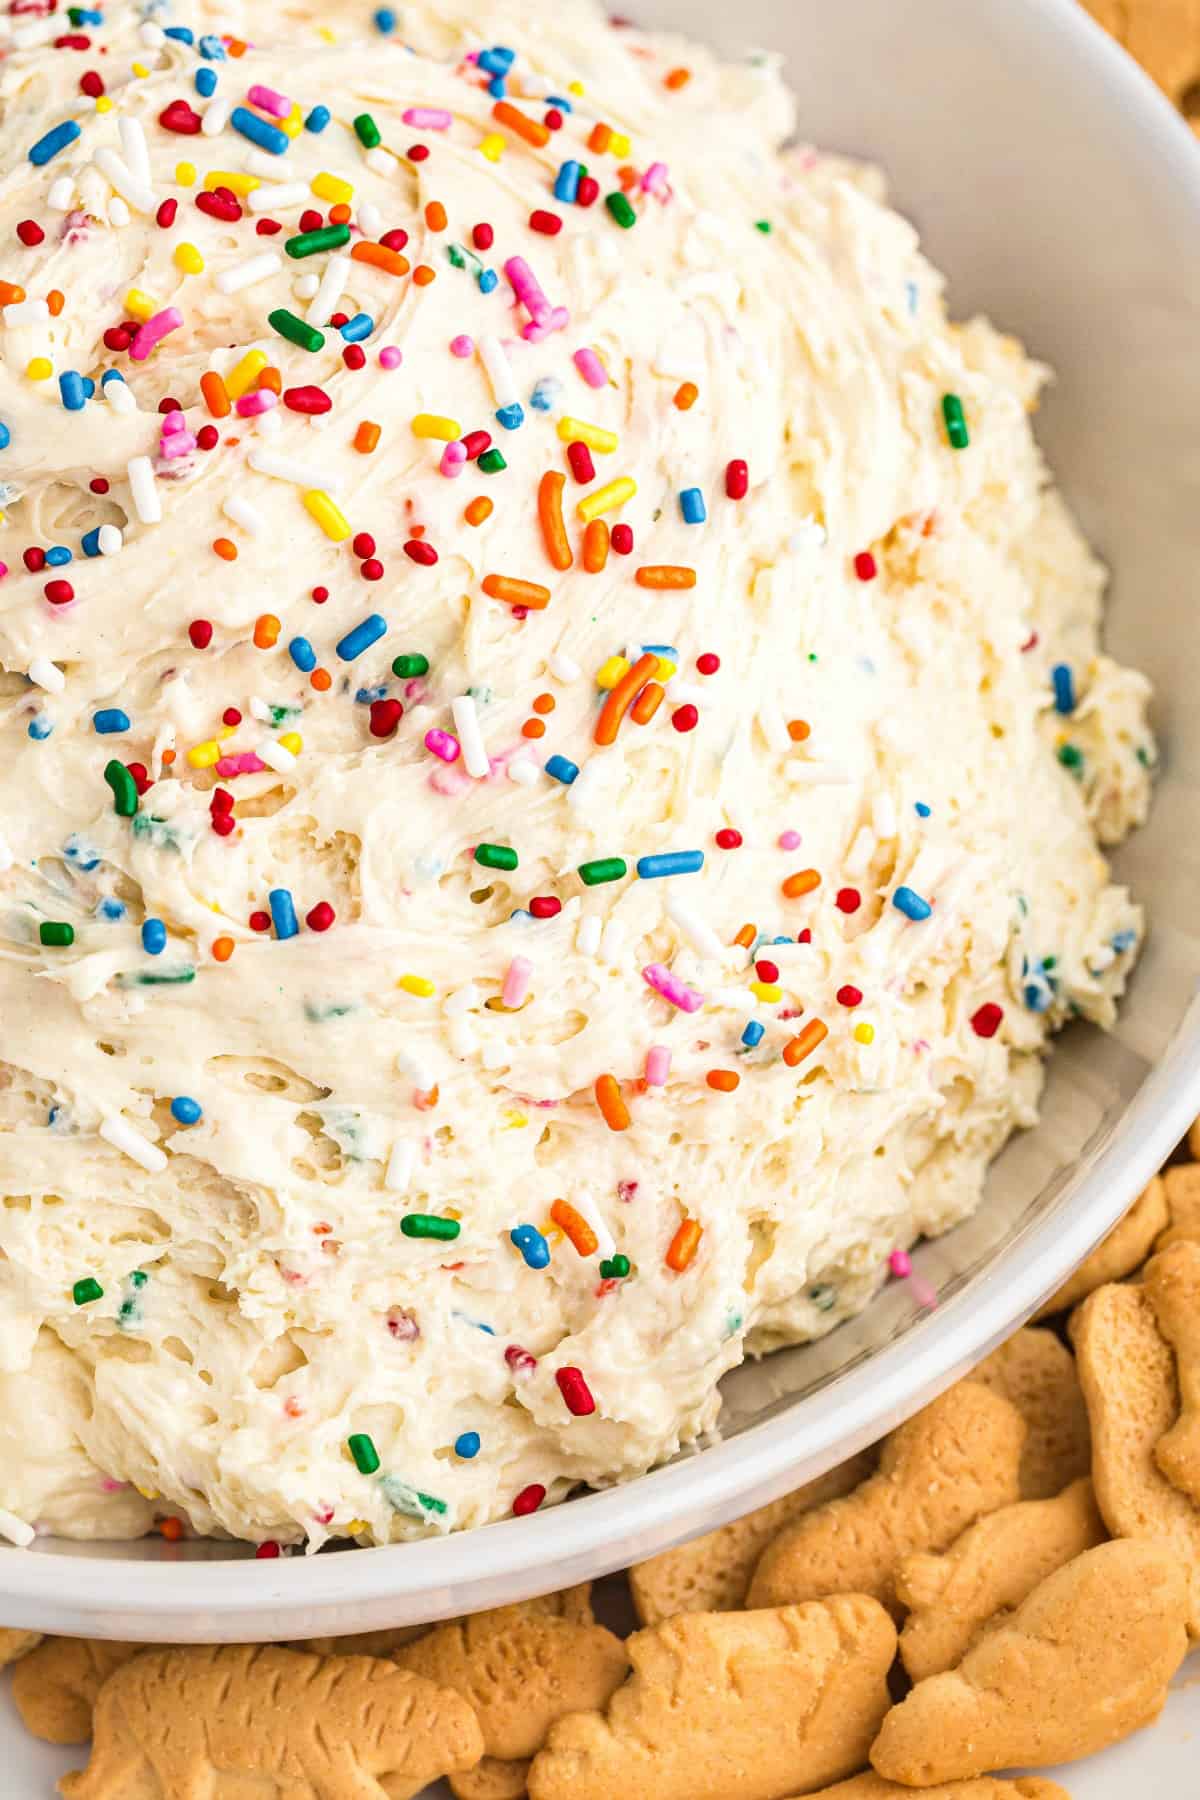 Funfetti cake batter dip in a white bowl served with animal crackers.